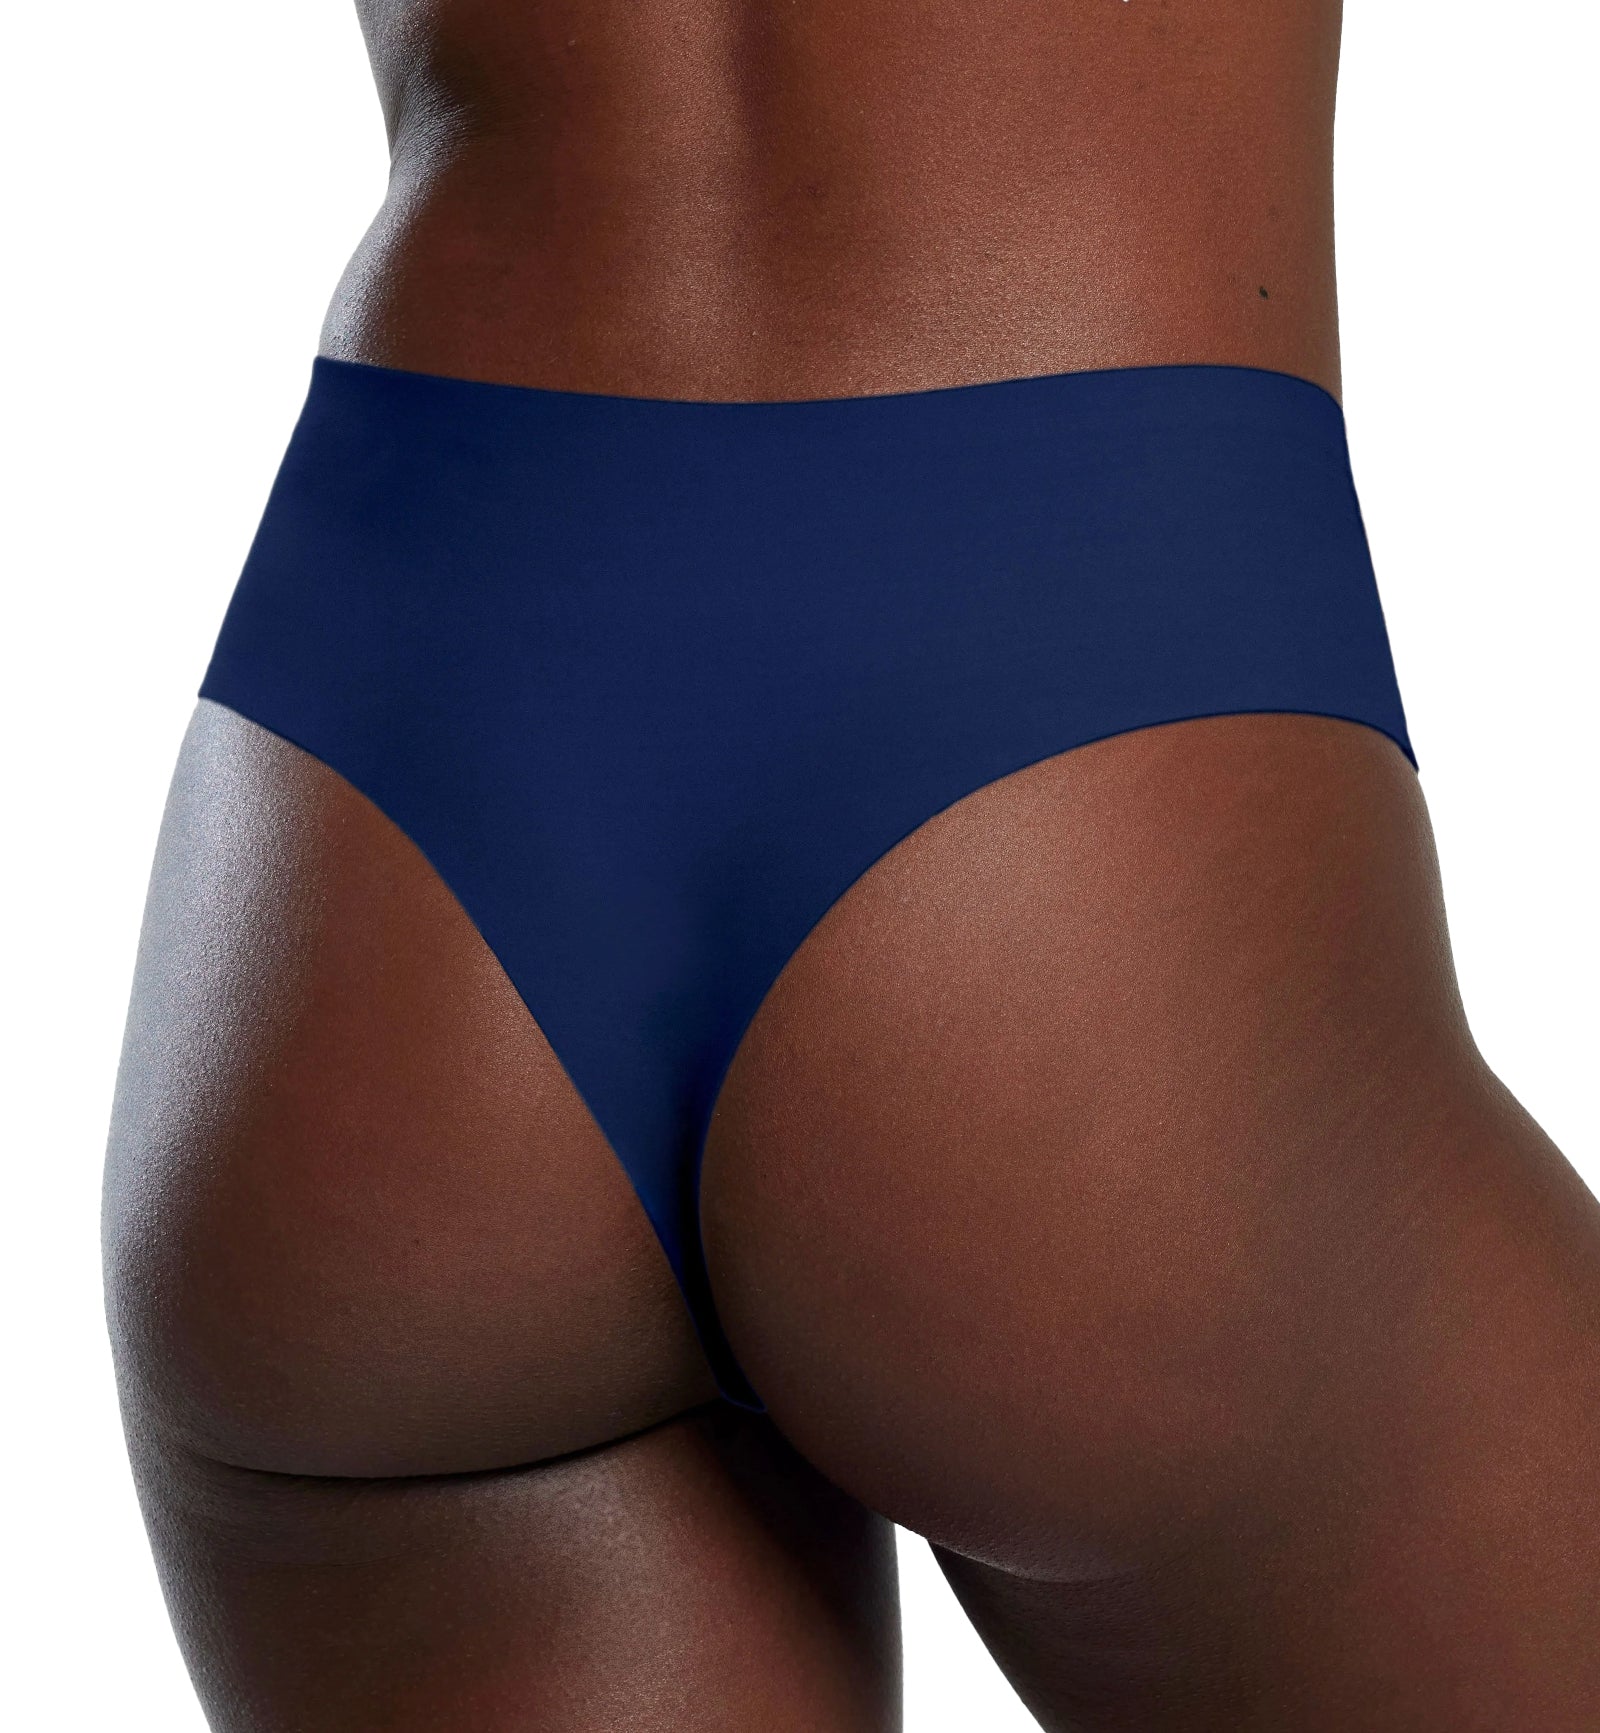 Evelyn & Bobbie High-Waisted Thong (1703),US 0-14,Midnight Navy - Midnight Navy,US 0 - 14